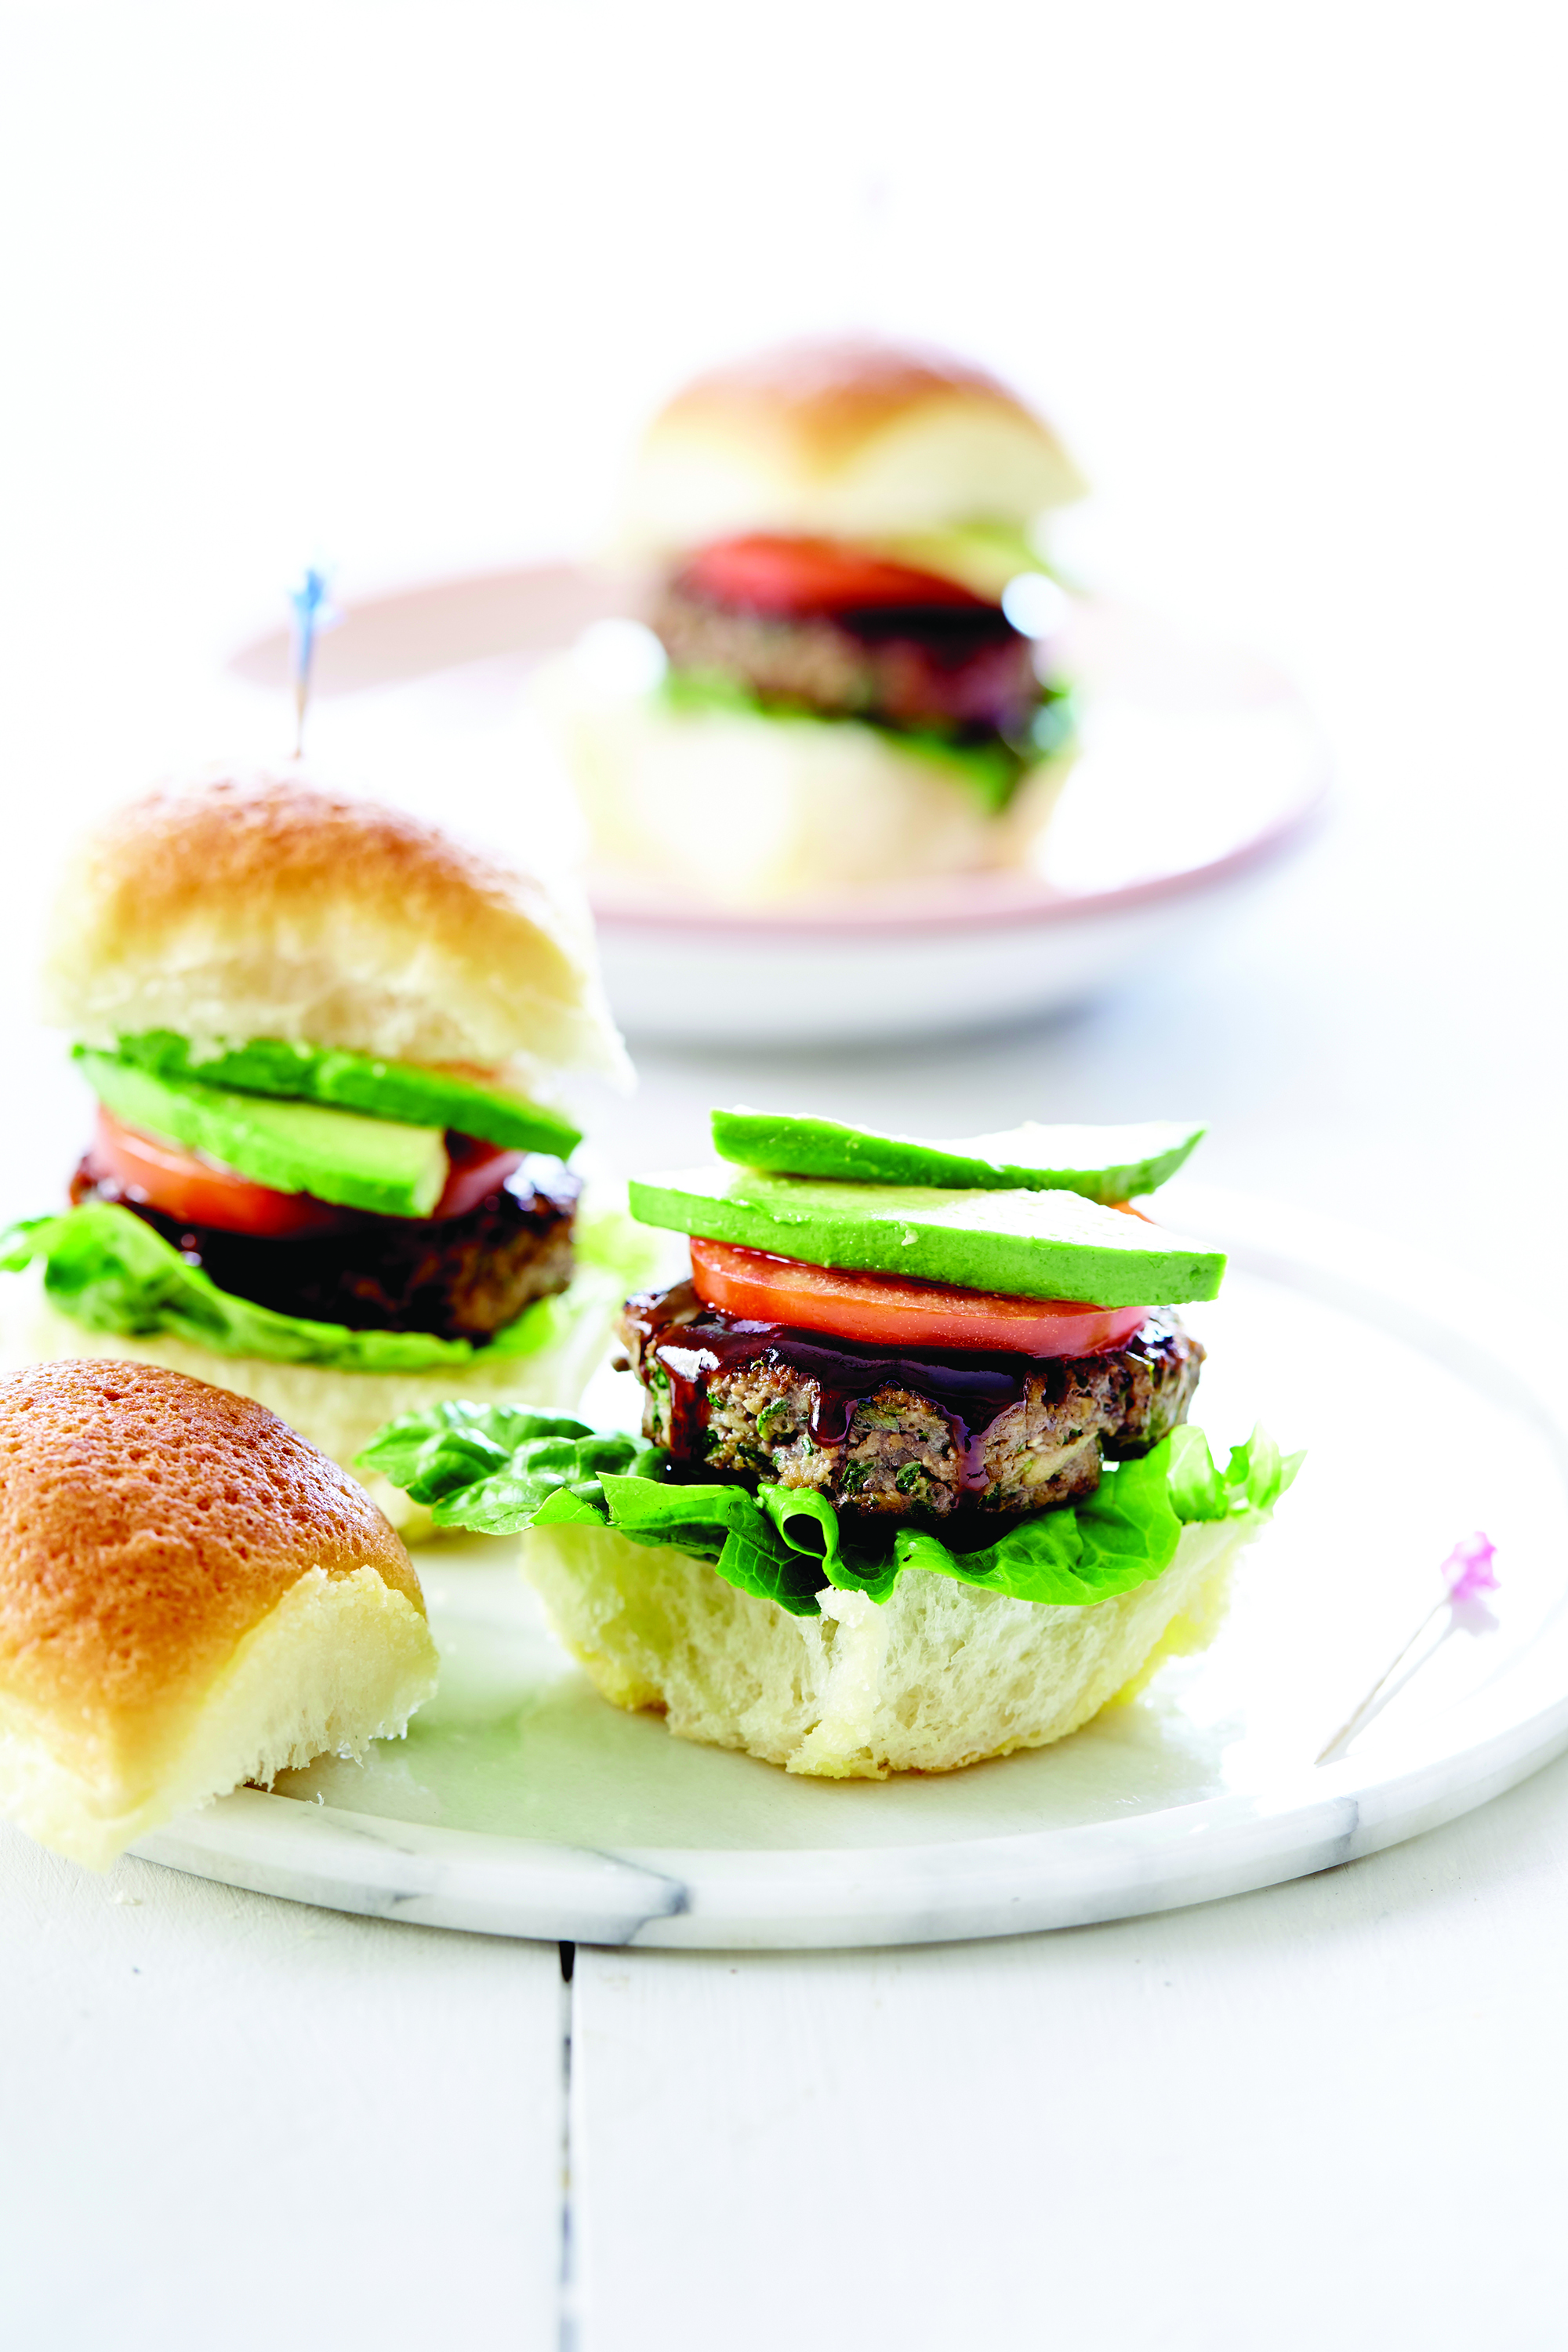 Super Sliders with Homemade Tomato Dipping Sauce